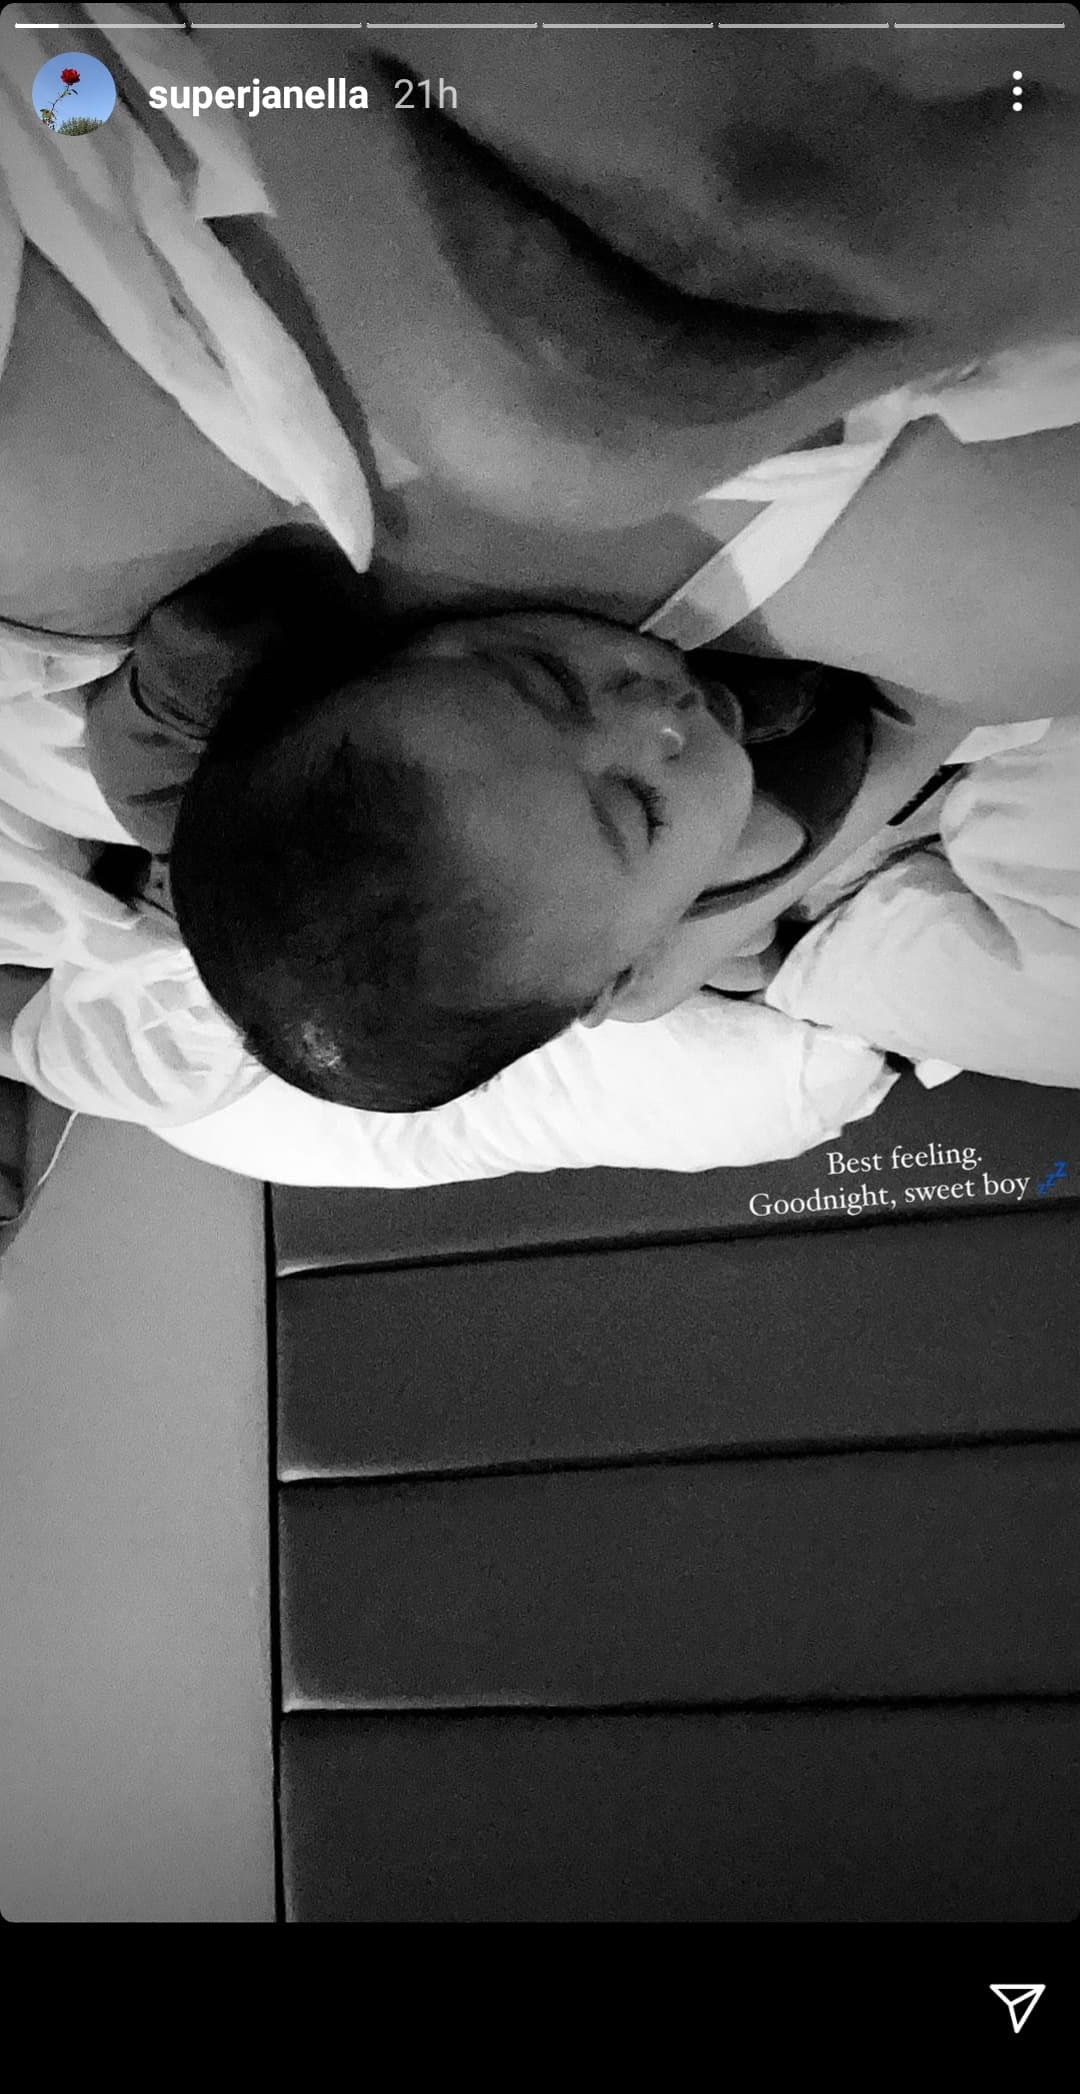 Janella Salvador taking care of her baby boy